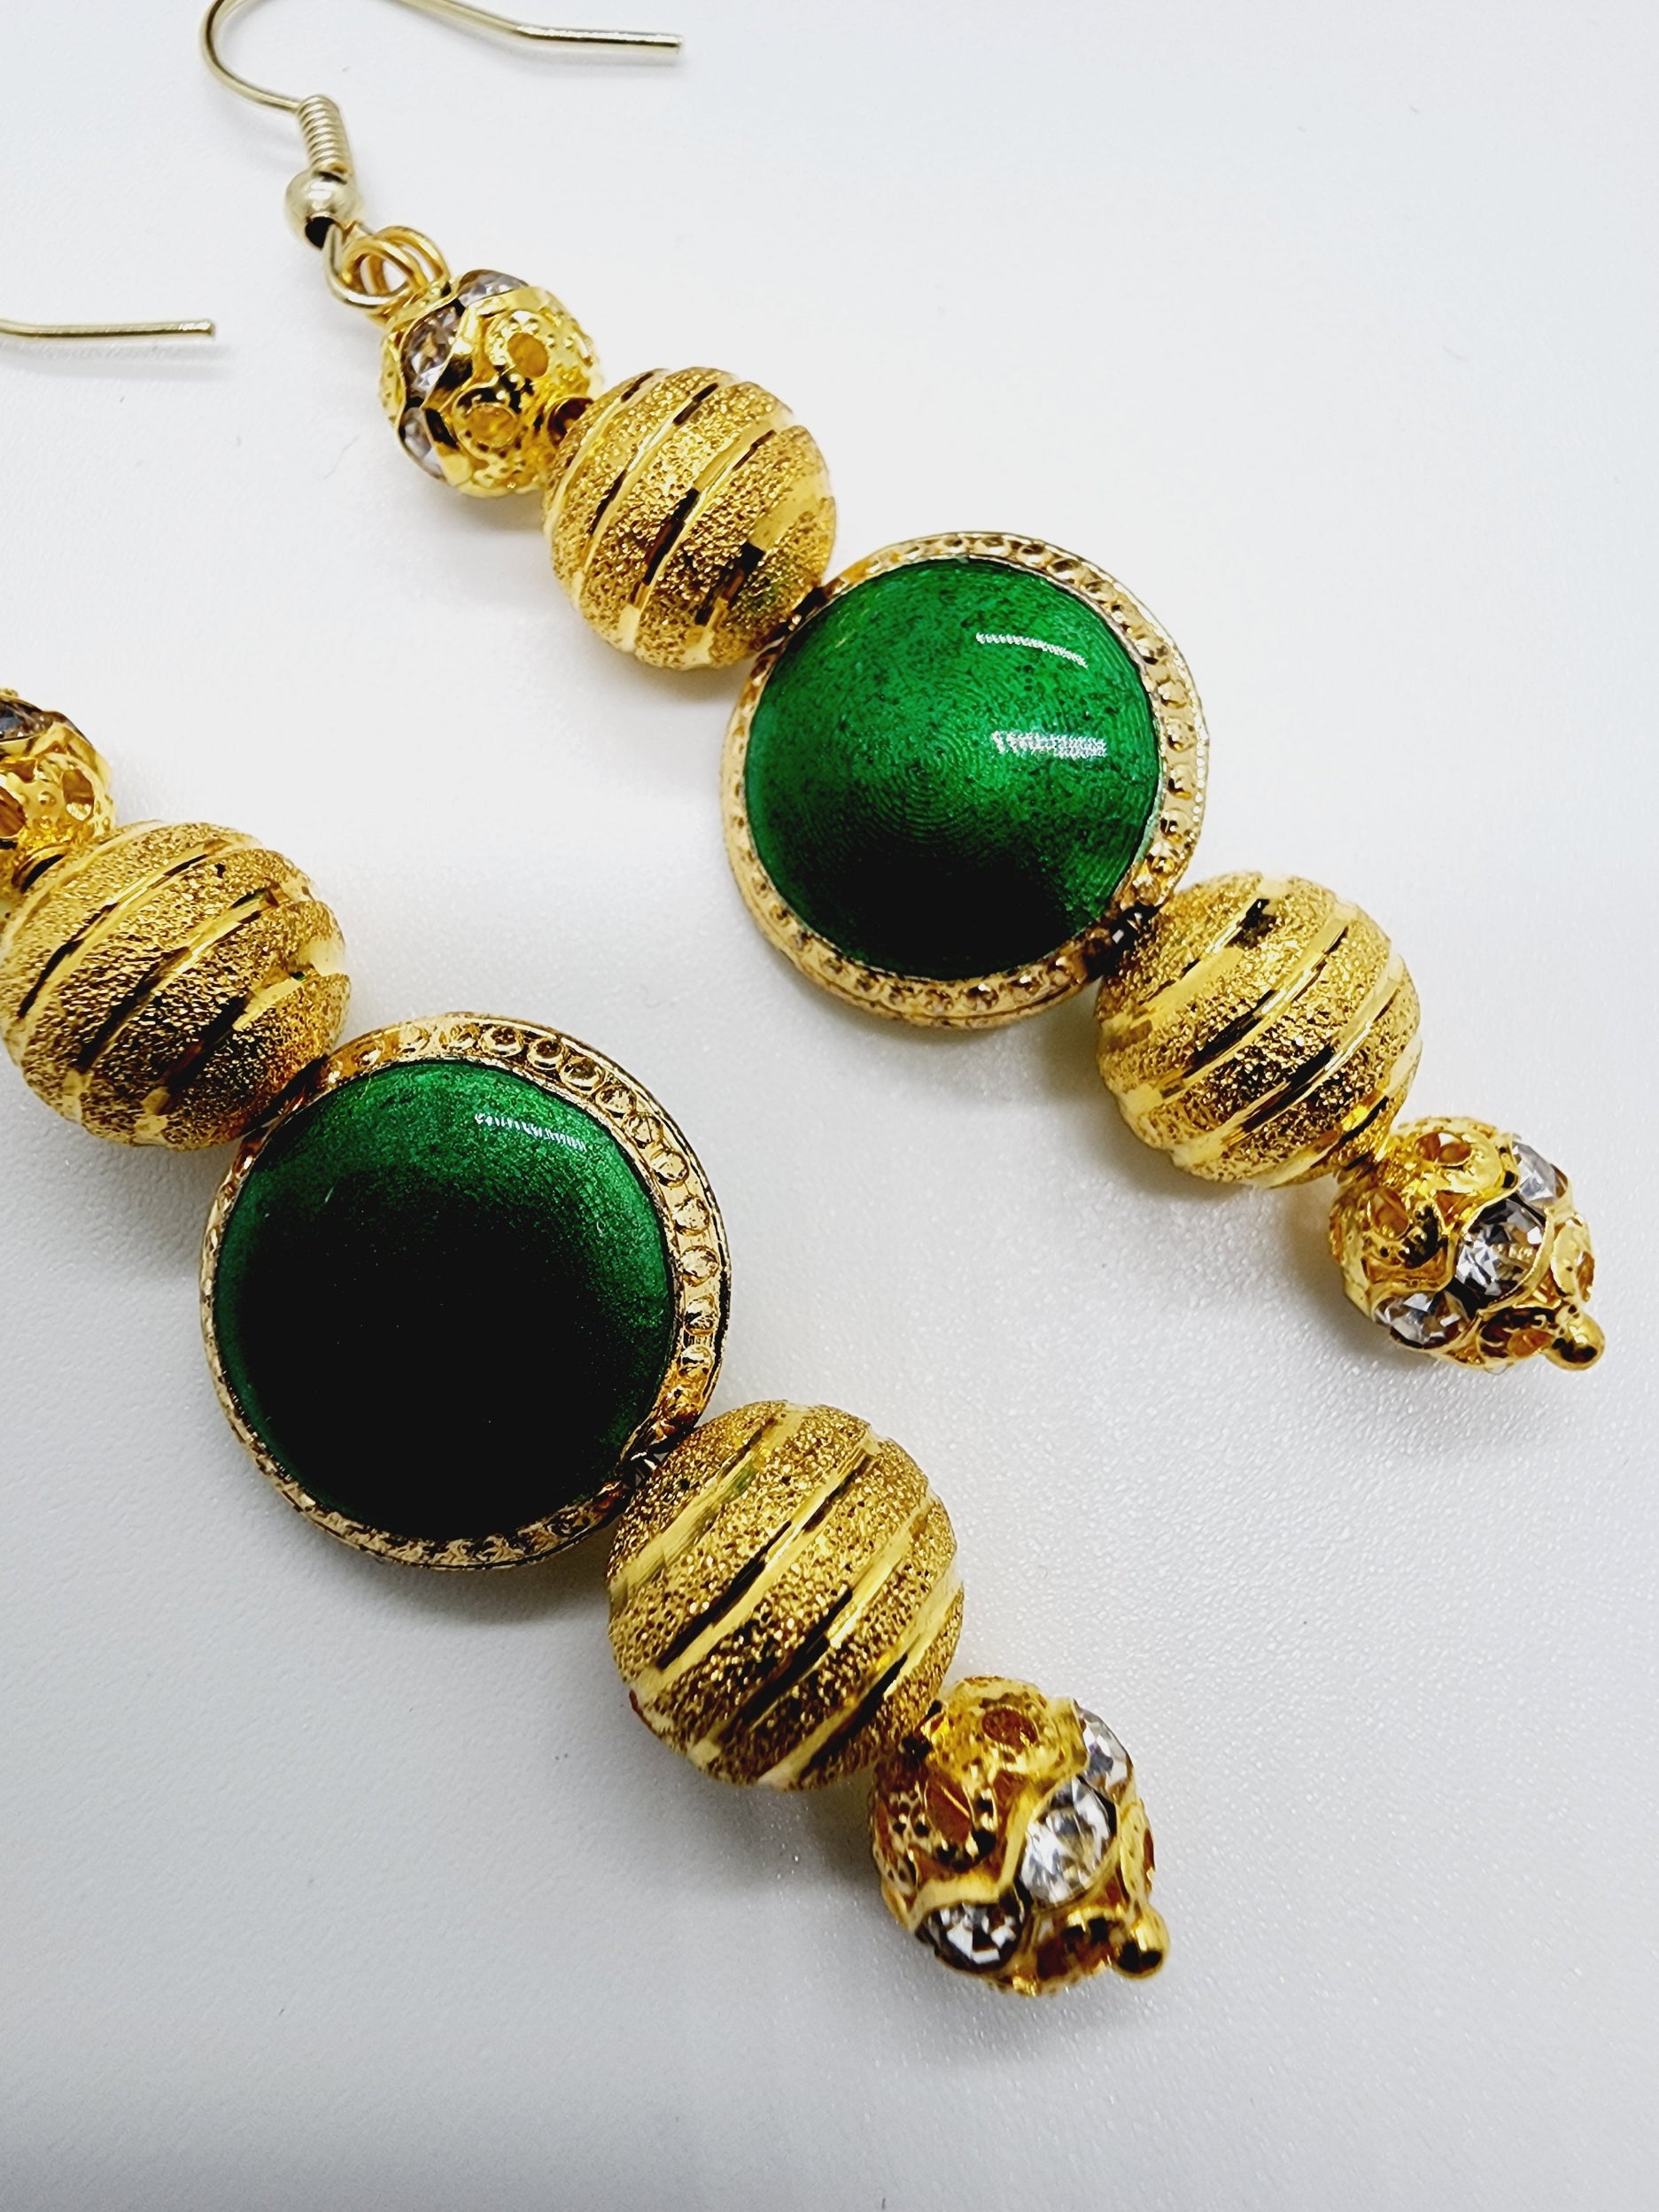 Length: 2.75 inches | Weight: 0.3 ounces  Distinctly You! These handmade earrings are made using gold inlaid rhinestone beads, striped gold bead plated and green glass bead, and hypoallergenic hooks with back closures.  